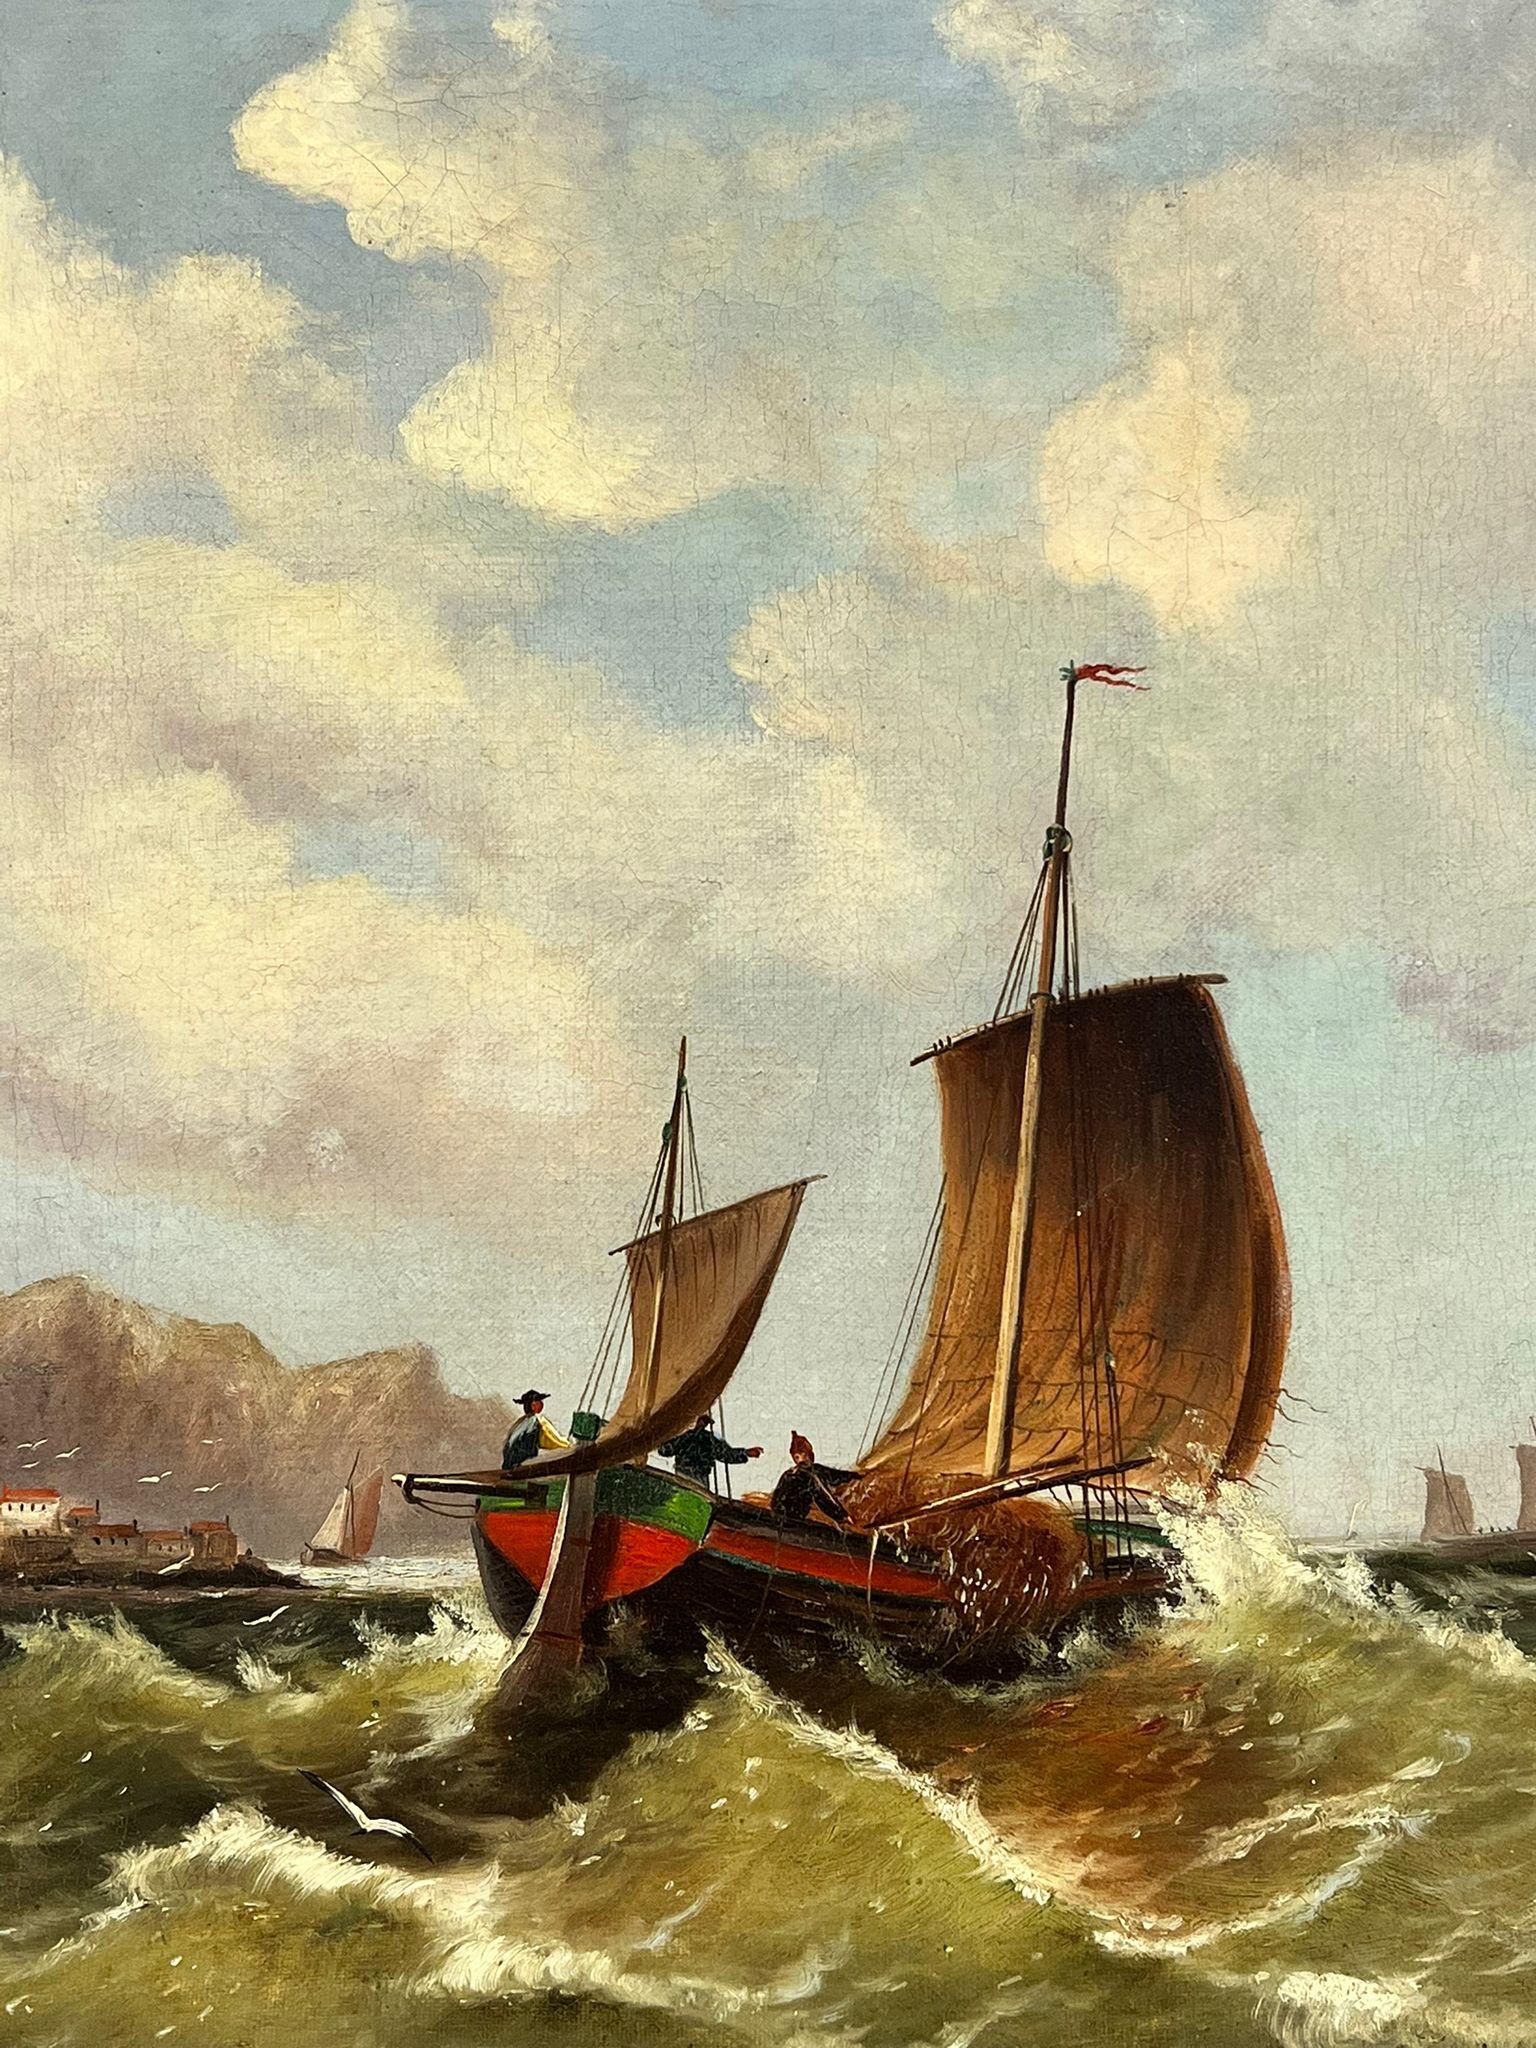 Fishing boats leaving port
Millson Hunt (Late 19th Century) British 
signed oil on canvas ,framed
canvas: 18 x 13.5 inches
framed: 22 x 18 inches
the painting is in overall very good and sound condition, please note the frame is very fragile and we